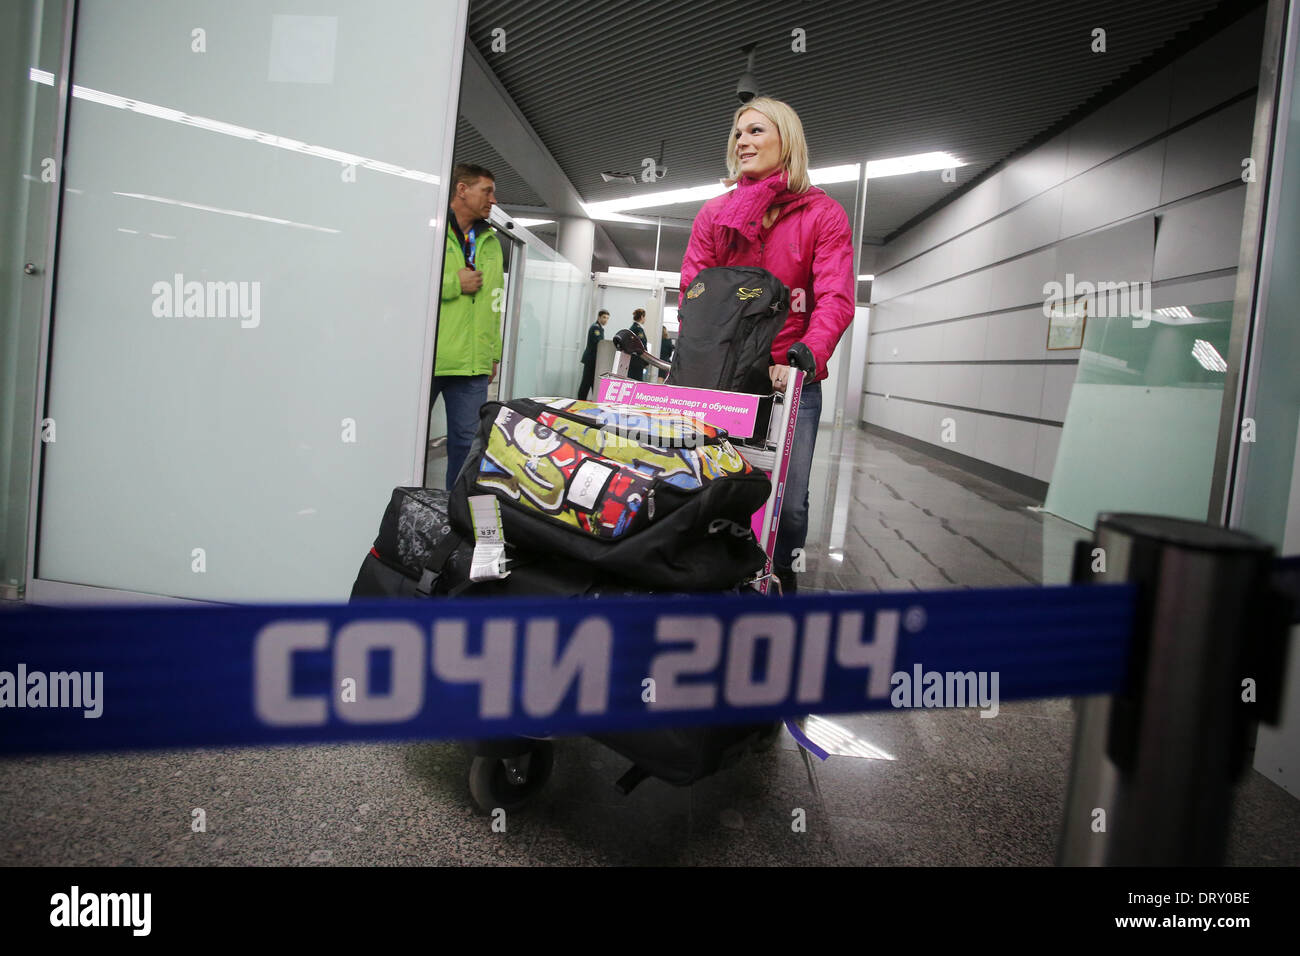 Sochi, Russia. 04th Feb, 2014. Alpine skier Maria Hoefl-Riesch of Germany arrives at the airport in Sochi, Russia, 04 February 2014. The Olympic Winter Games 2014 in Sochi run from 07 to 23 February 2014. Photo: Fredrik von Erichsen/dpa /dpa/Alamy Live News Stock Photo